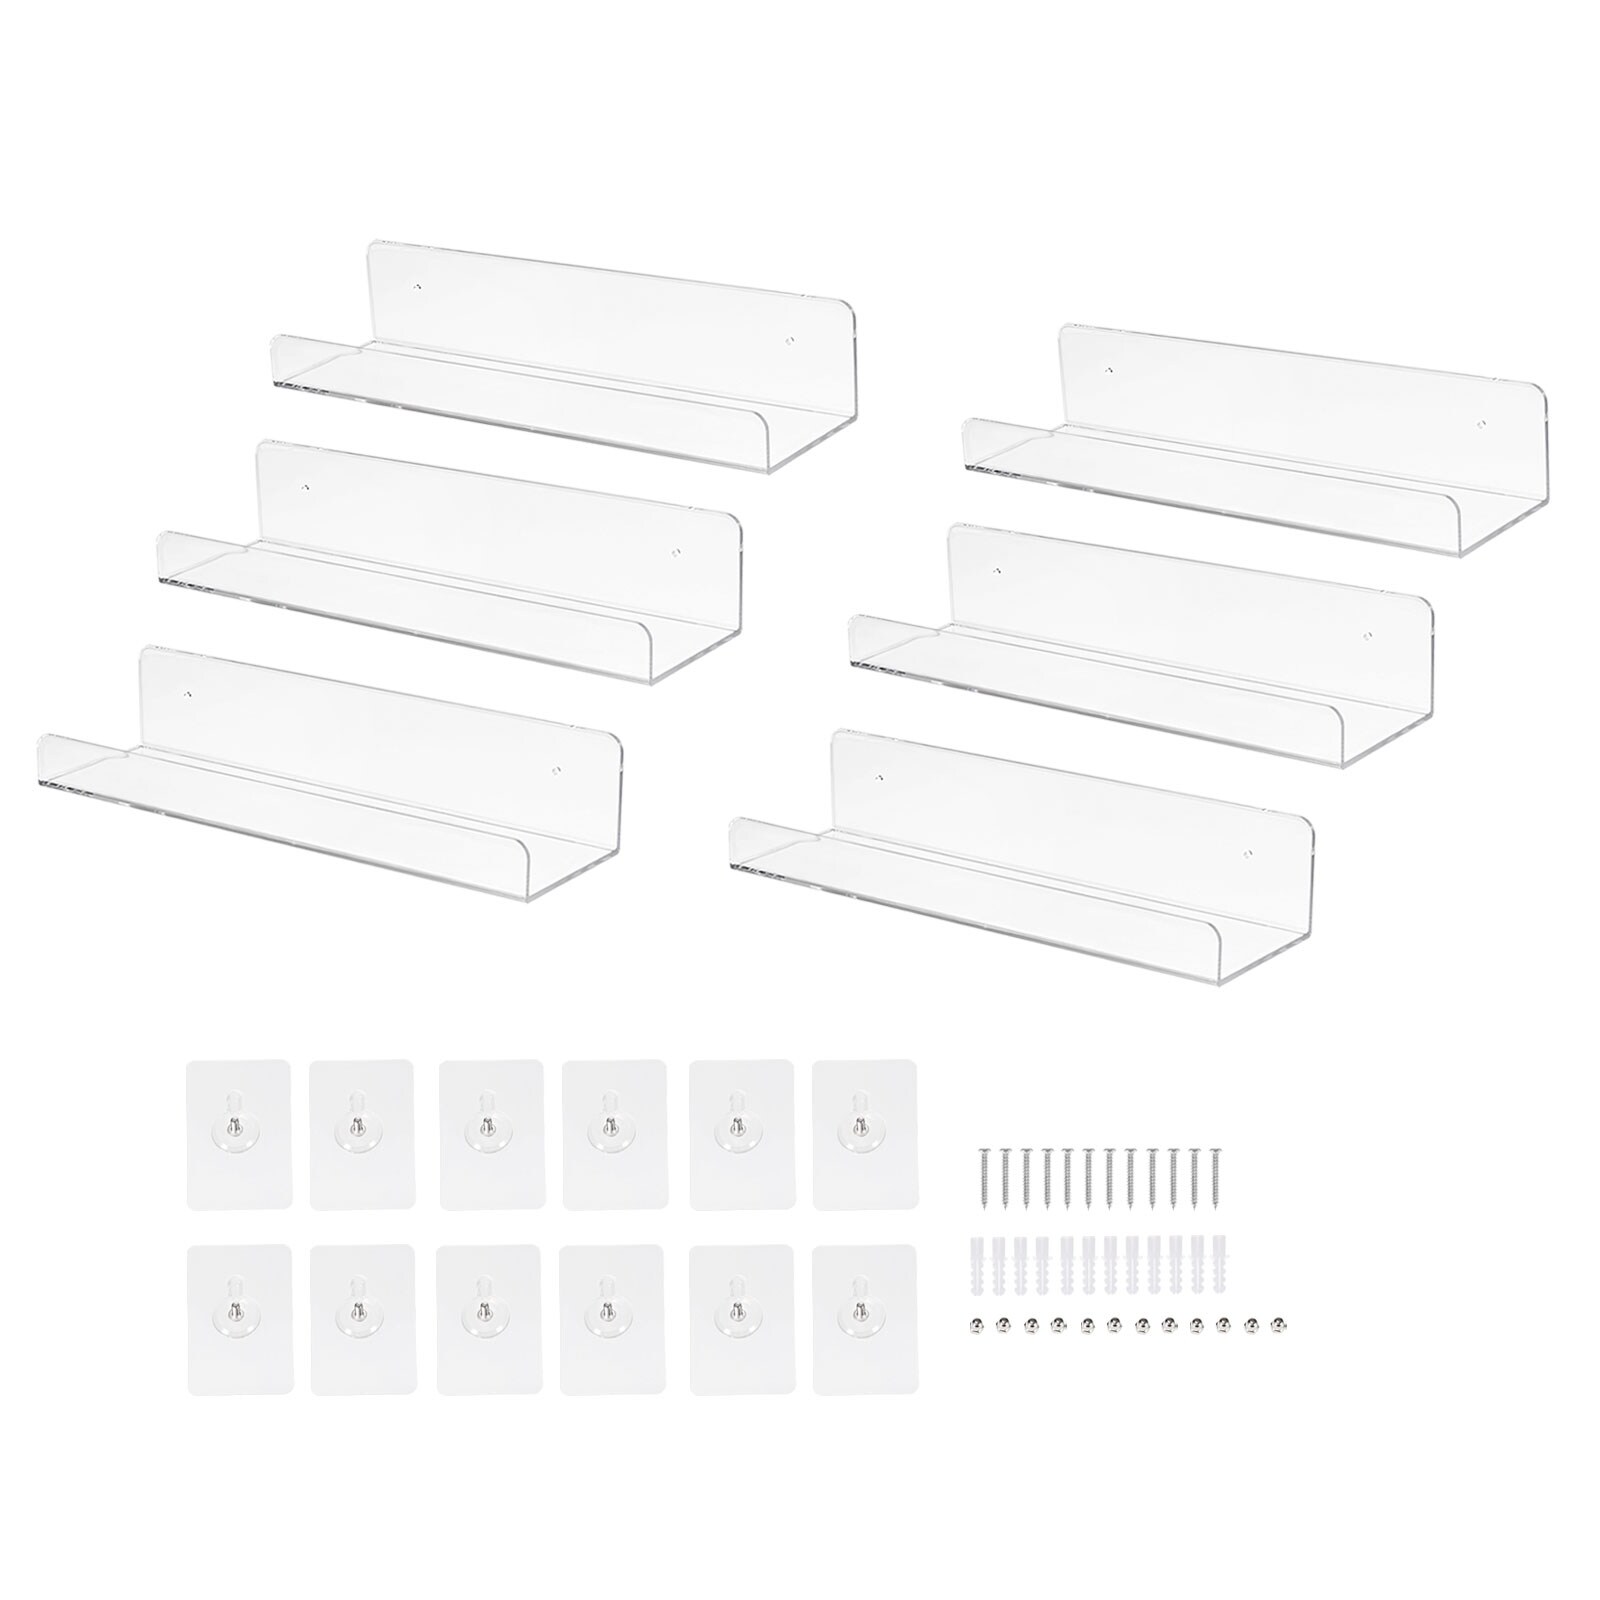 https://ak1.ostkcdn.com/images/products/is/images/direct/64141da30f20a90adfbd99ef11dc6ef1daef1cc2/6Pcs-Acrylic-Floating-Shelf%2C-15-Inch-Floating-Wall-Mounted-Shelves-Transparent.jpg